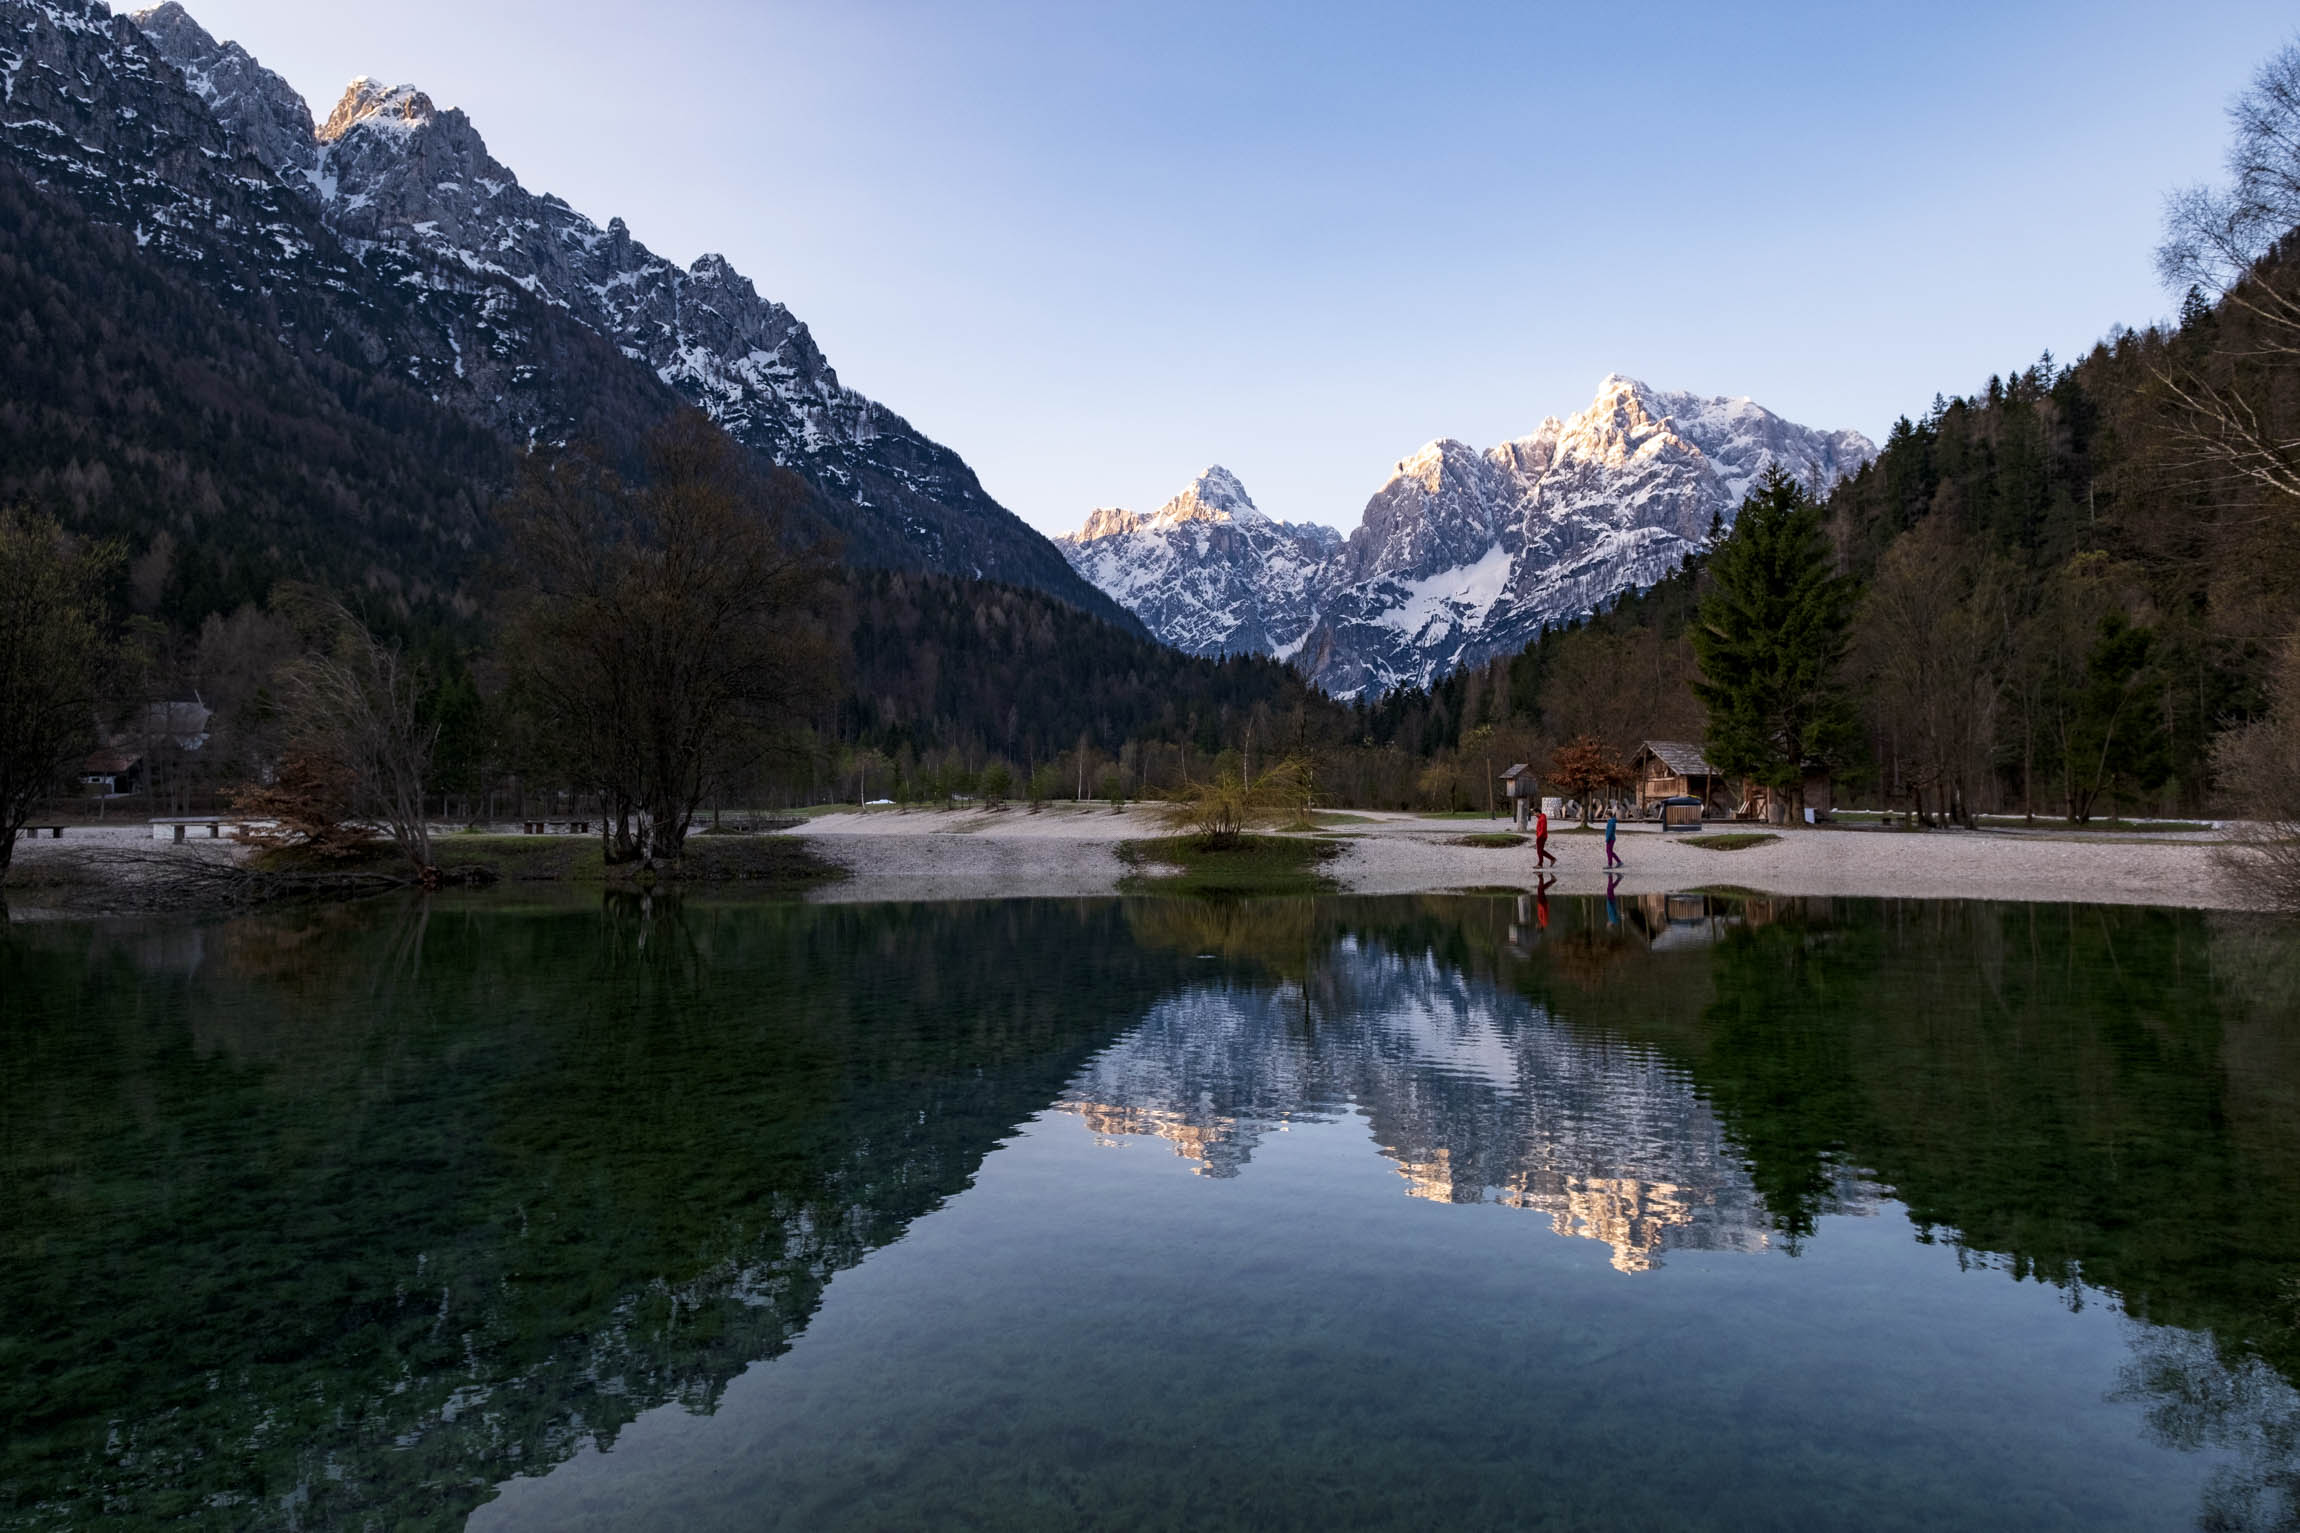 How Hiking May Hold the Key to Slovenia's Tourism Future